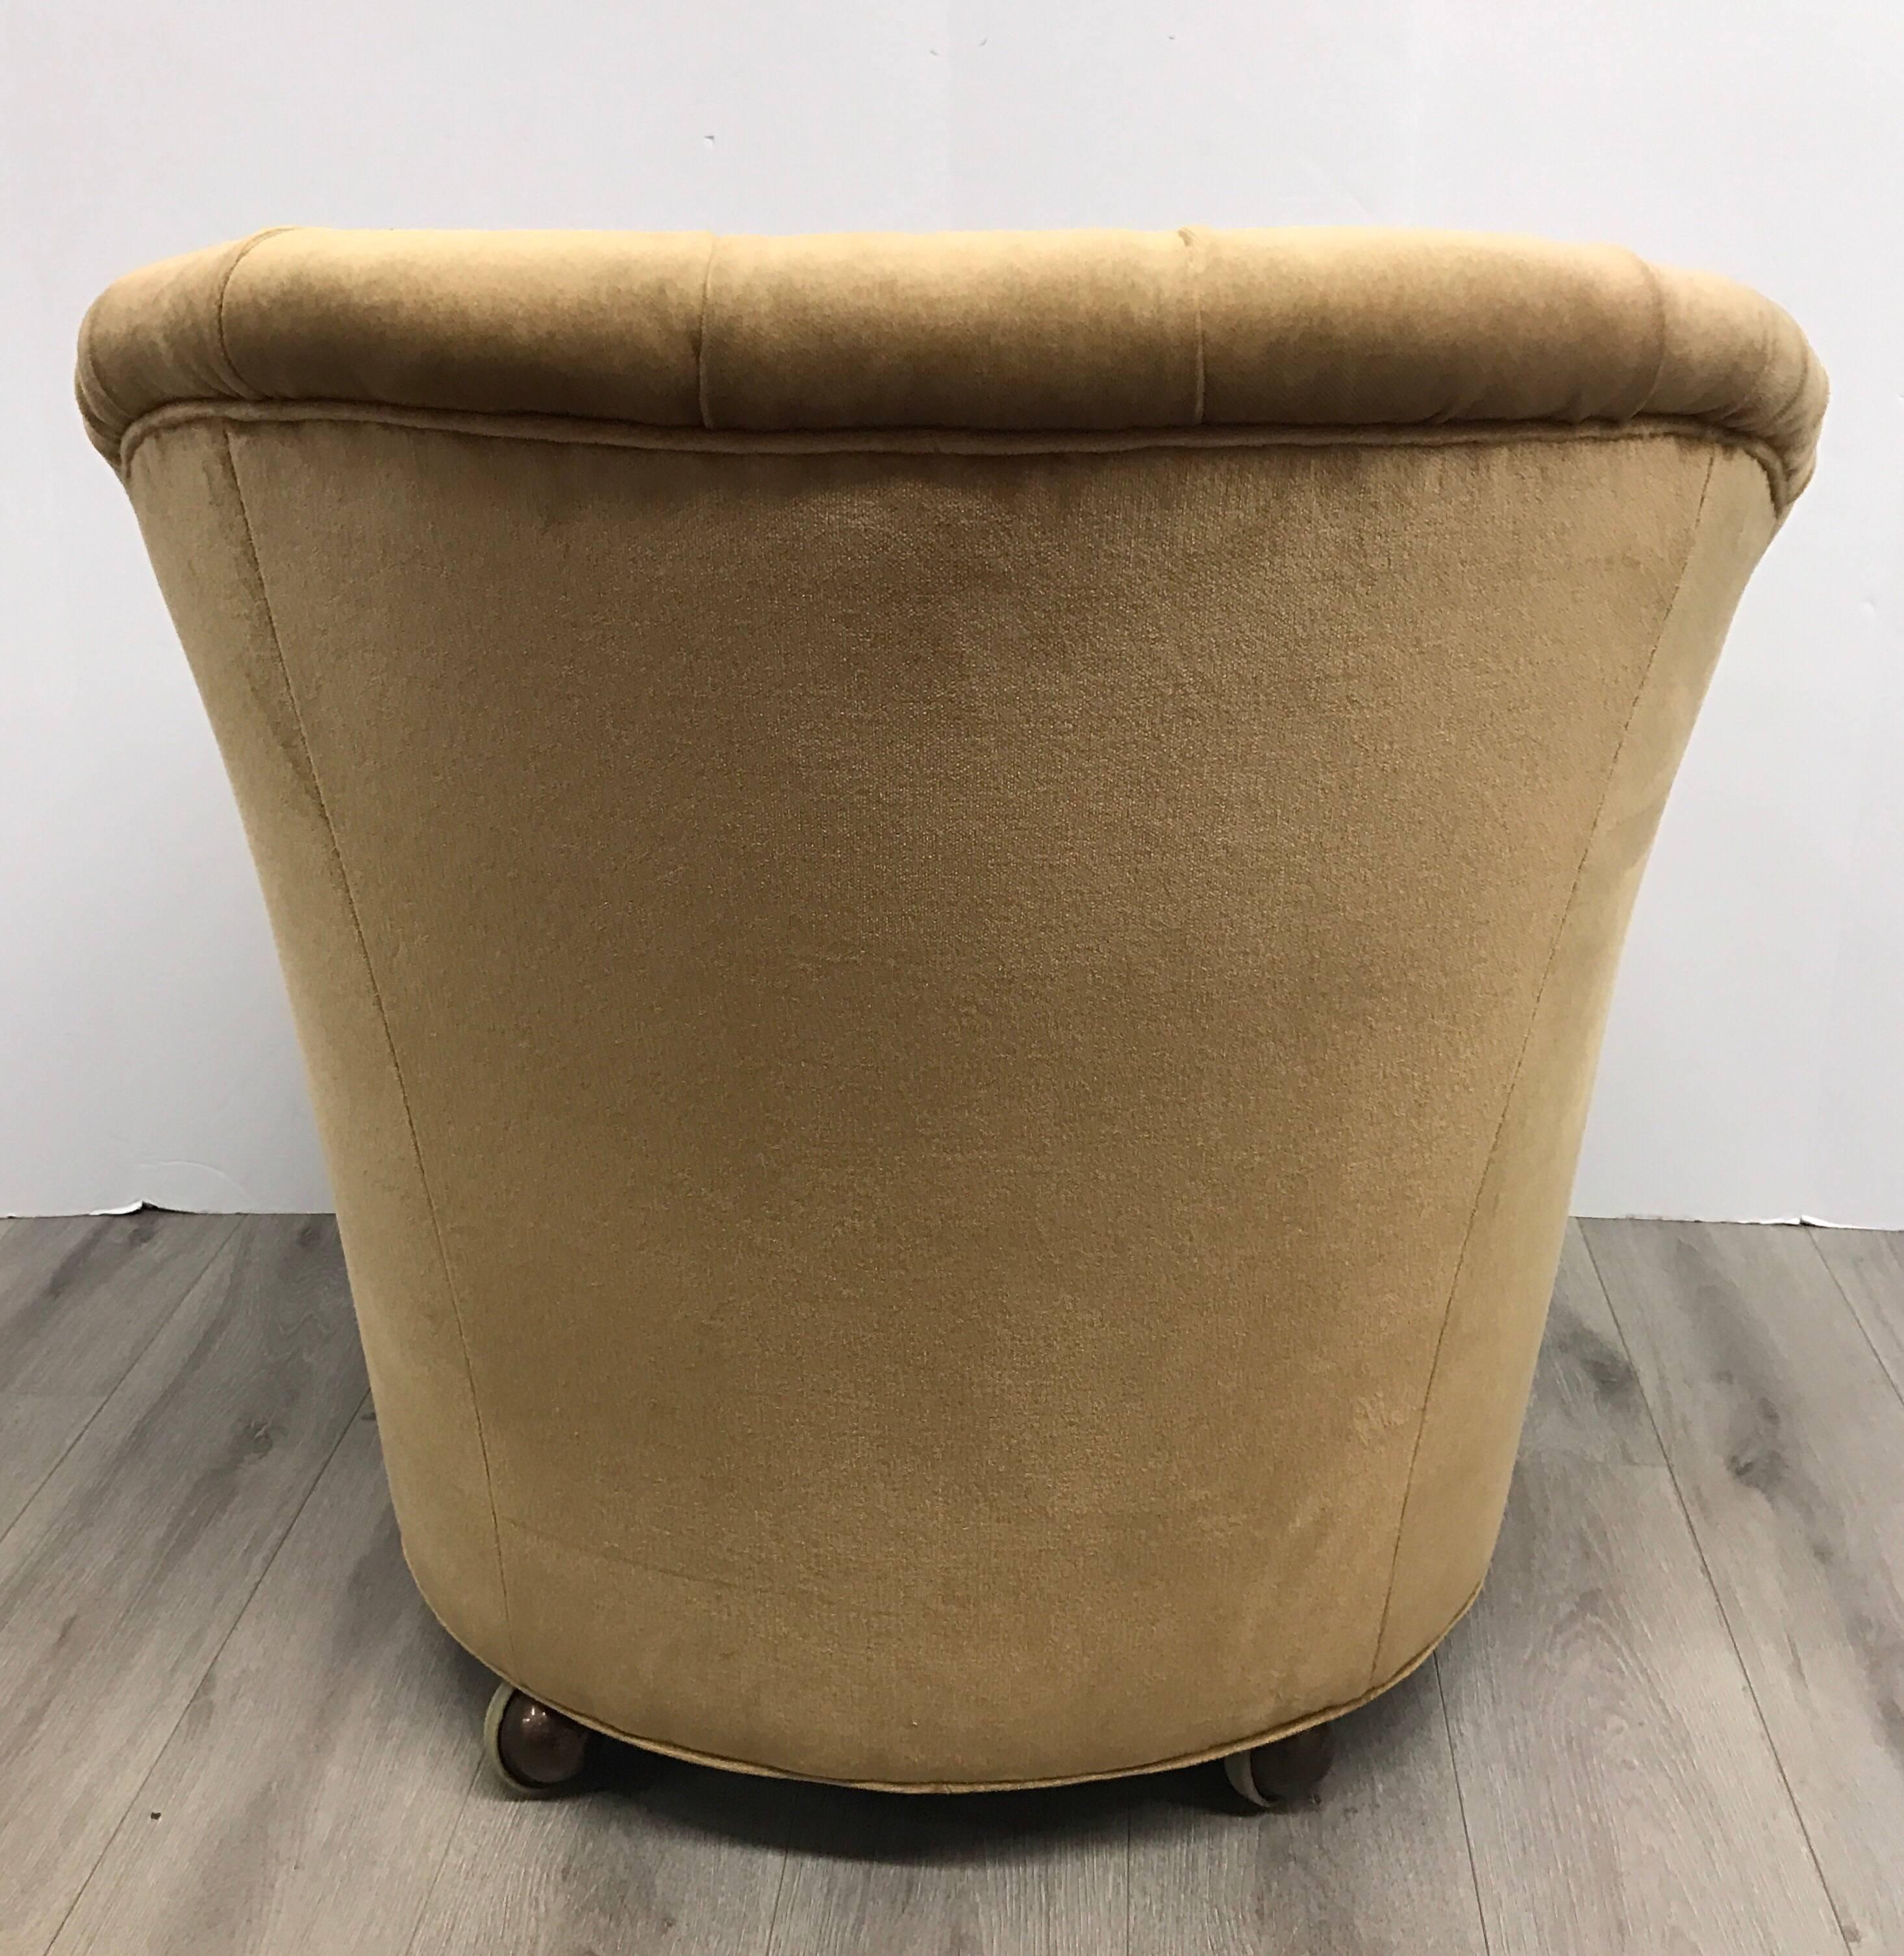 American Pair of Vintage Gold Tufted Velvet Barrel Chairs on Casters, Mid-Century Modern